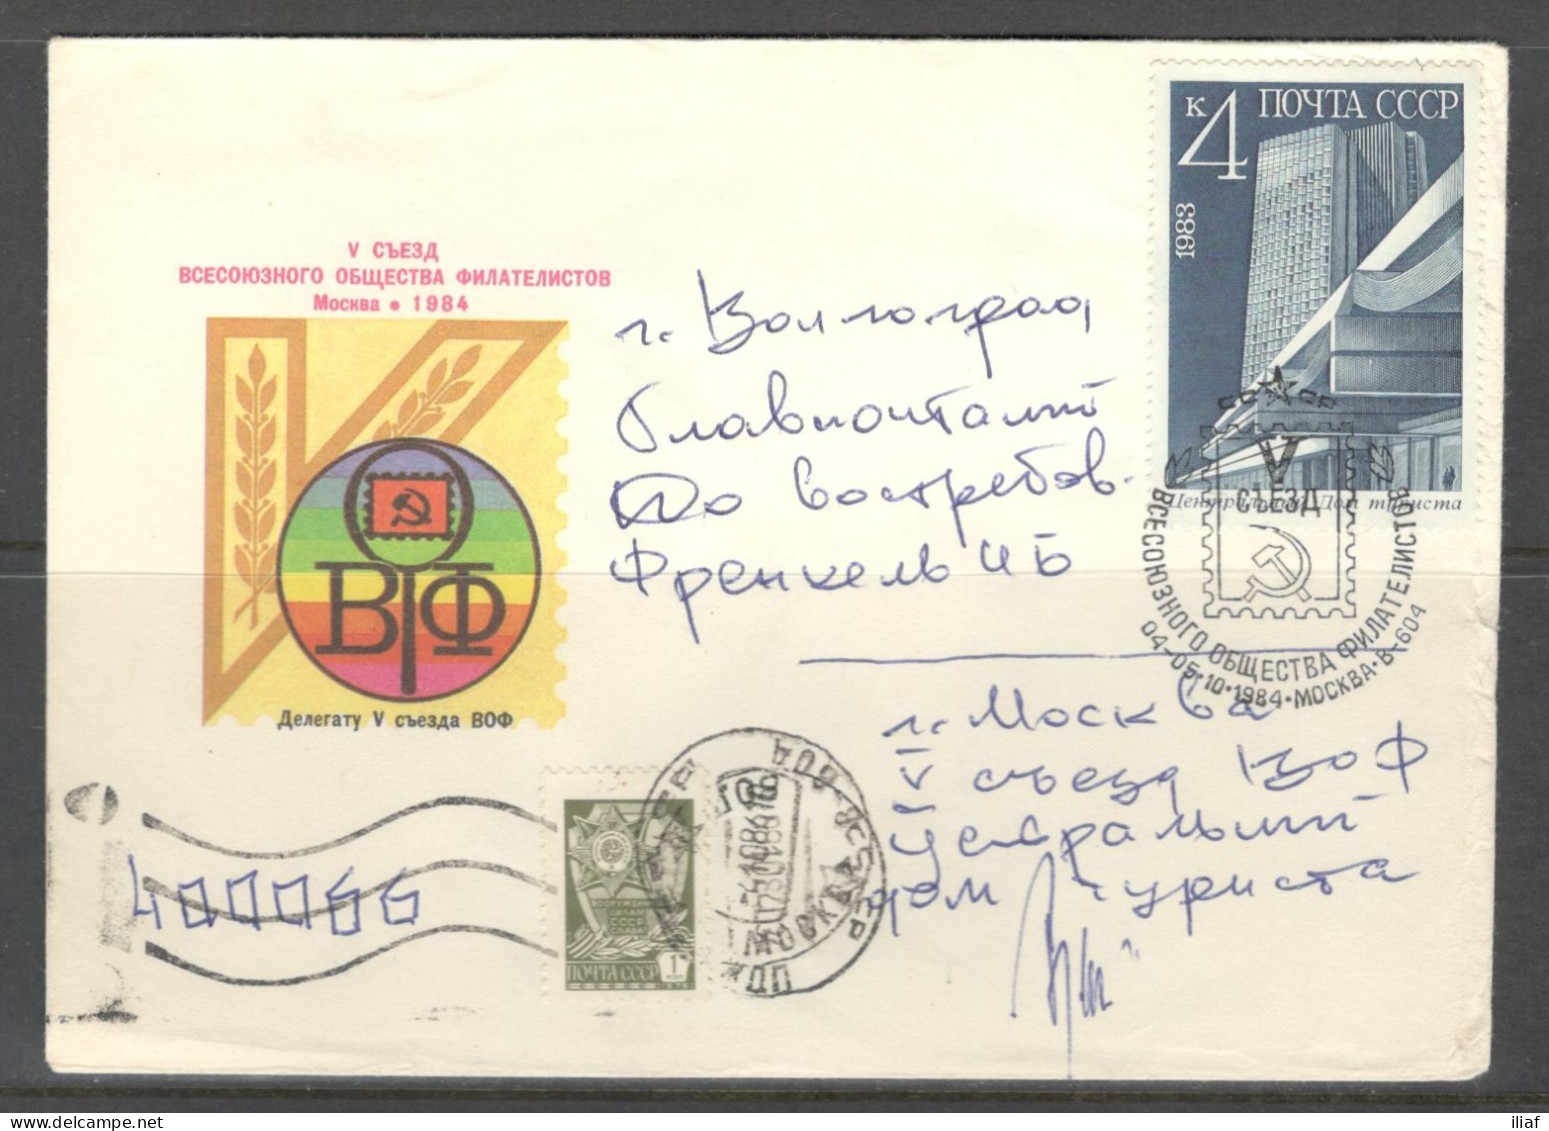 RUSSIA & USSR. 5th Congress Of The All-Union Society Of Philatelists. Special Envelope For Participants. - Tag Der Briefmarke